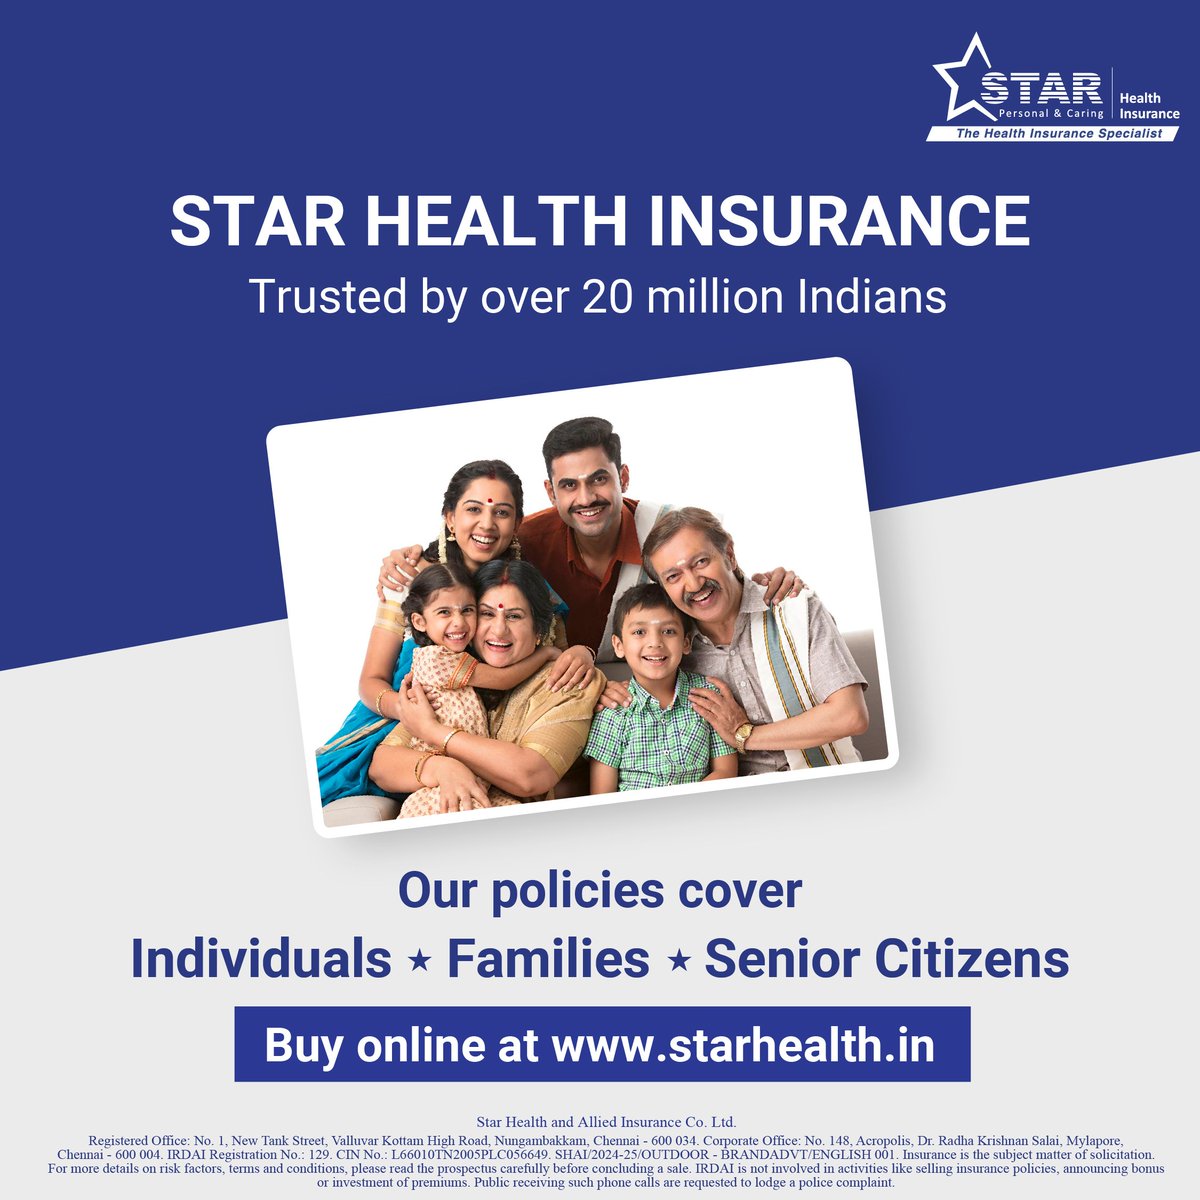 We're more than just a policy provider; we're your trusted partner in health. Invest in your future with us!

#starhealth #starhealthinsurance #healthinsurance